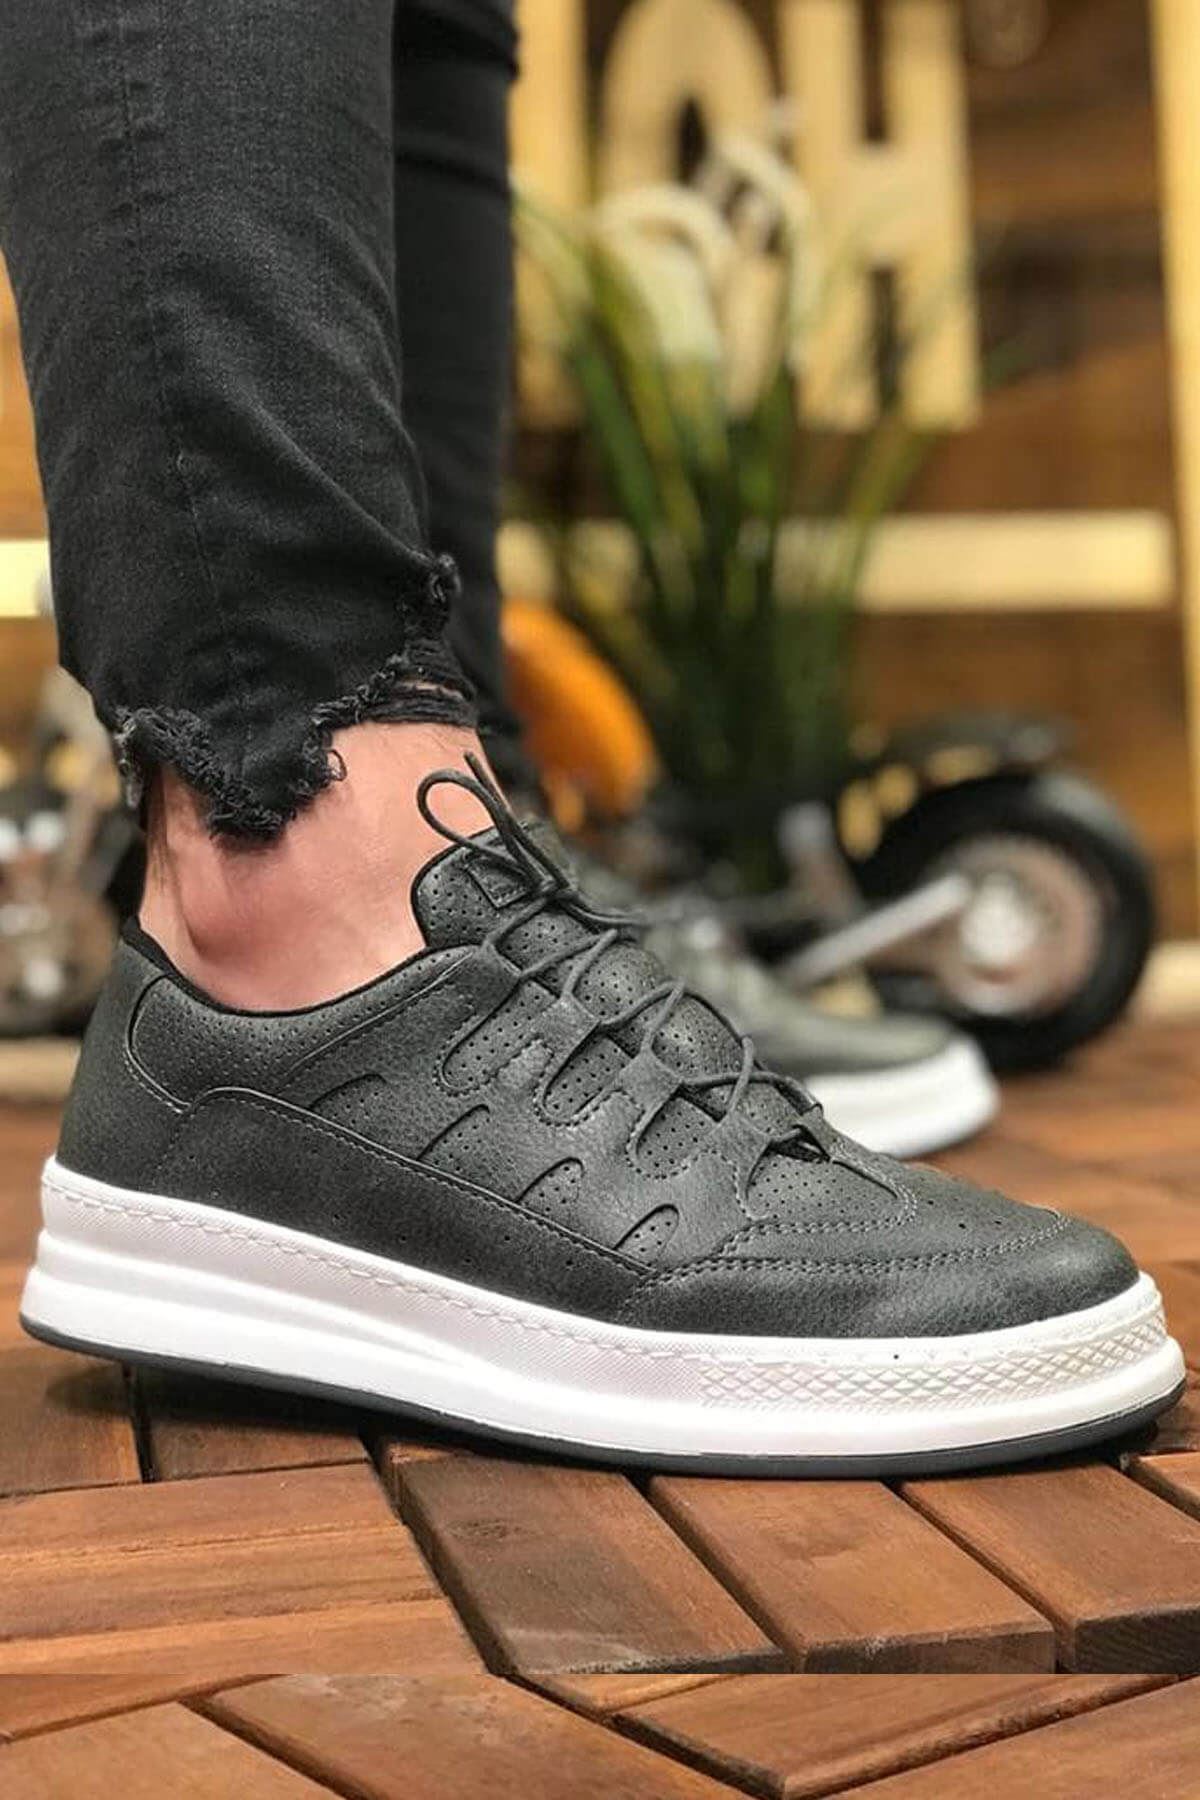 Chekich Men's Casual Shoes Anthracite Color Faux Leather Comfortable Spring and Fall Seasons 2021 Fashion Breathable Bride Suits Flat Orthopedic White Outsole Walking Sneakers Sport Lightweight Oxford Hombre CH040 V1